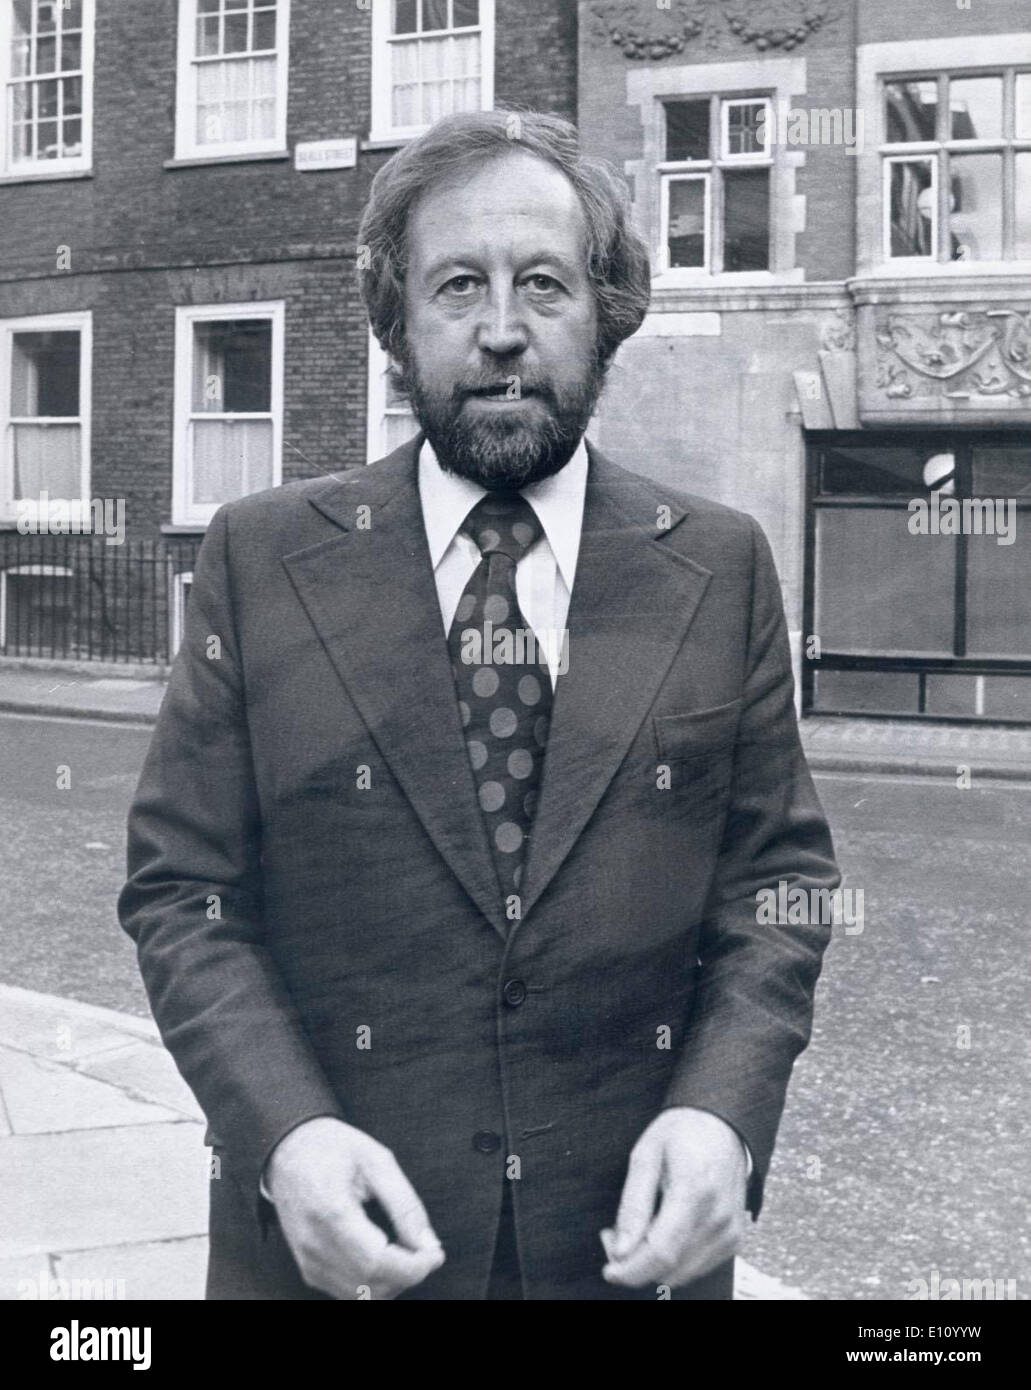 Oct 29, 1974 - London, England, United Kingdom - PAUL RAYMOND leaves the High Court after his divorce papers went through were he had to pay his ex wife 250,000 Pounds from their divorce. Stock Photo